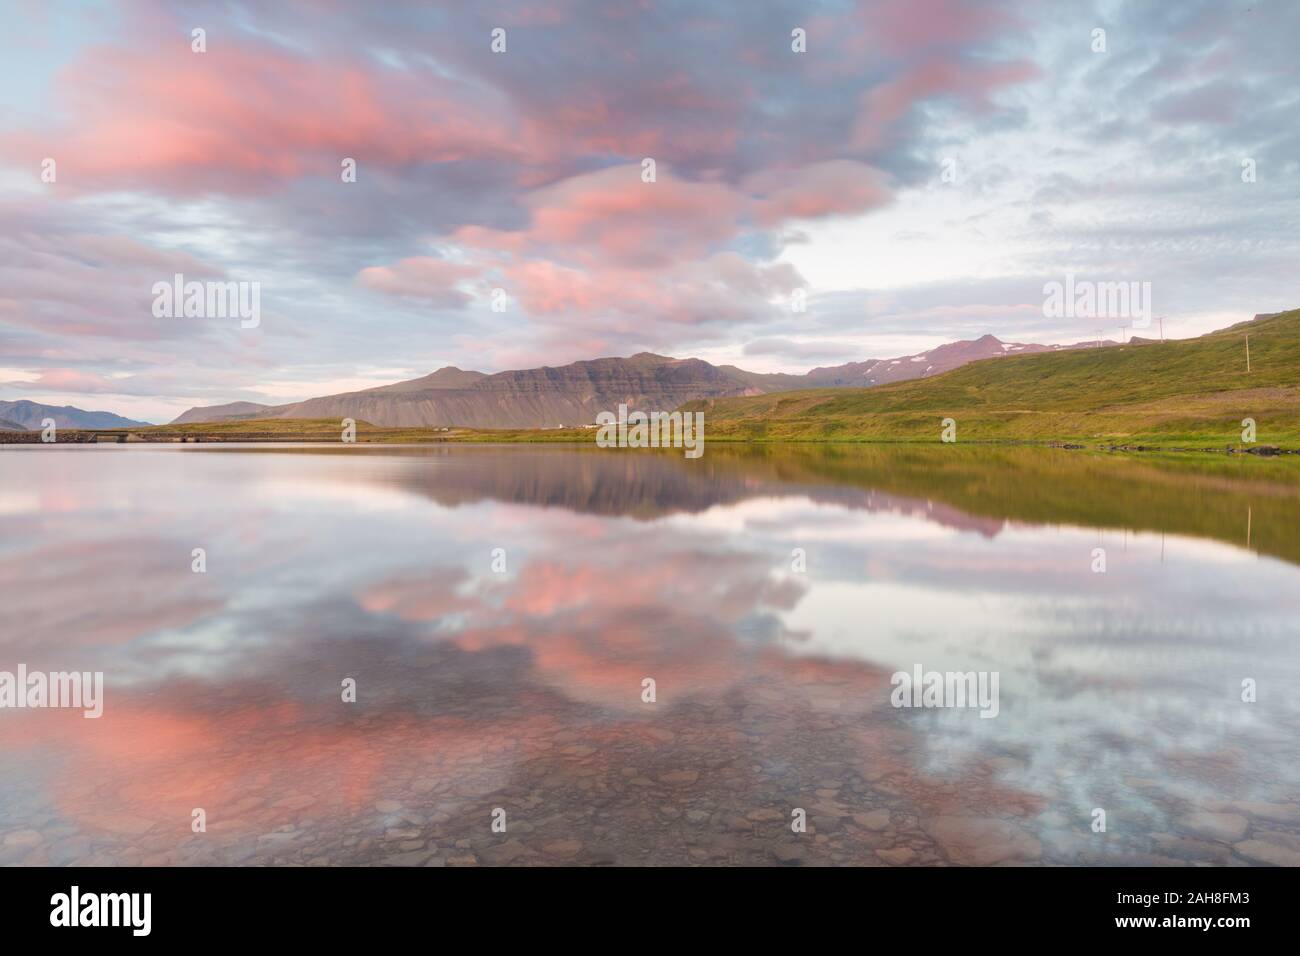 Wide angle view of a colorful symmetrical Icelandic sunset with pink clouds reflecting on the waters of a pond Stock Photo